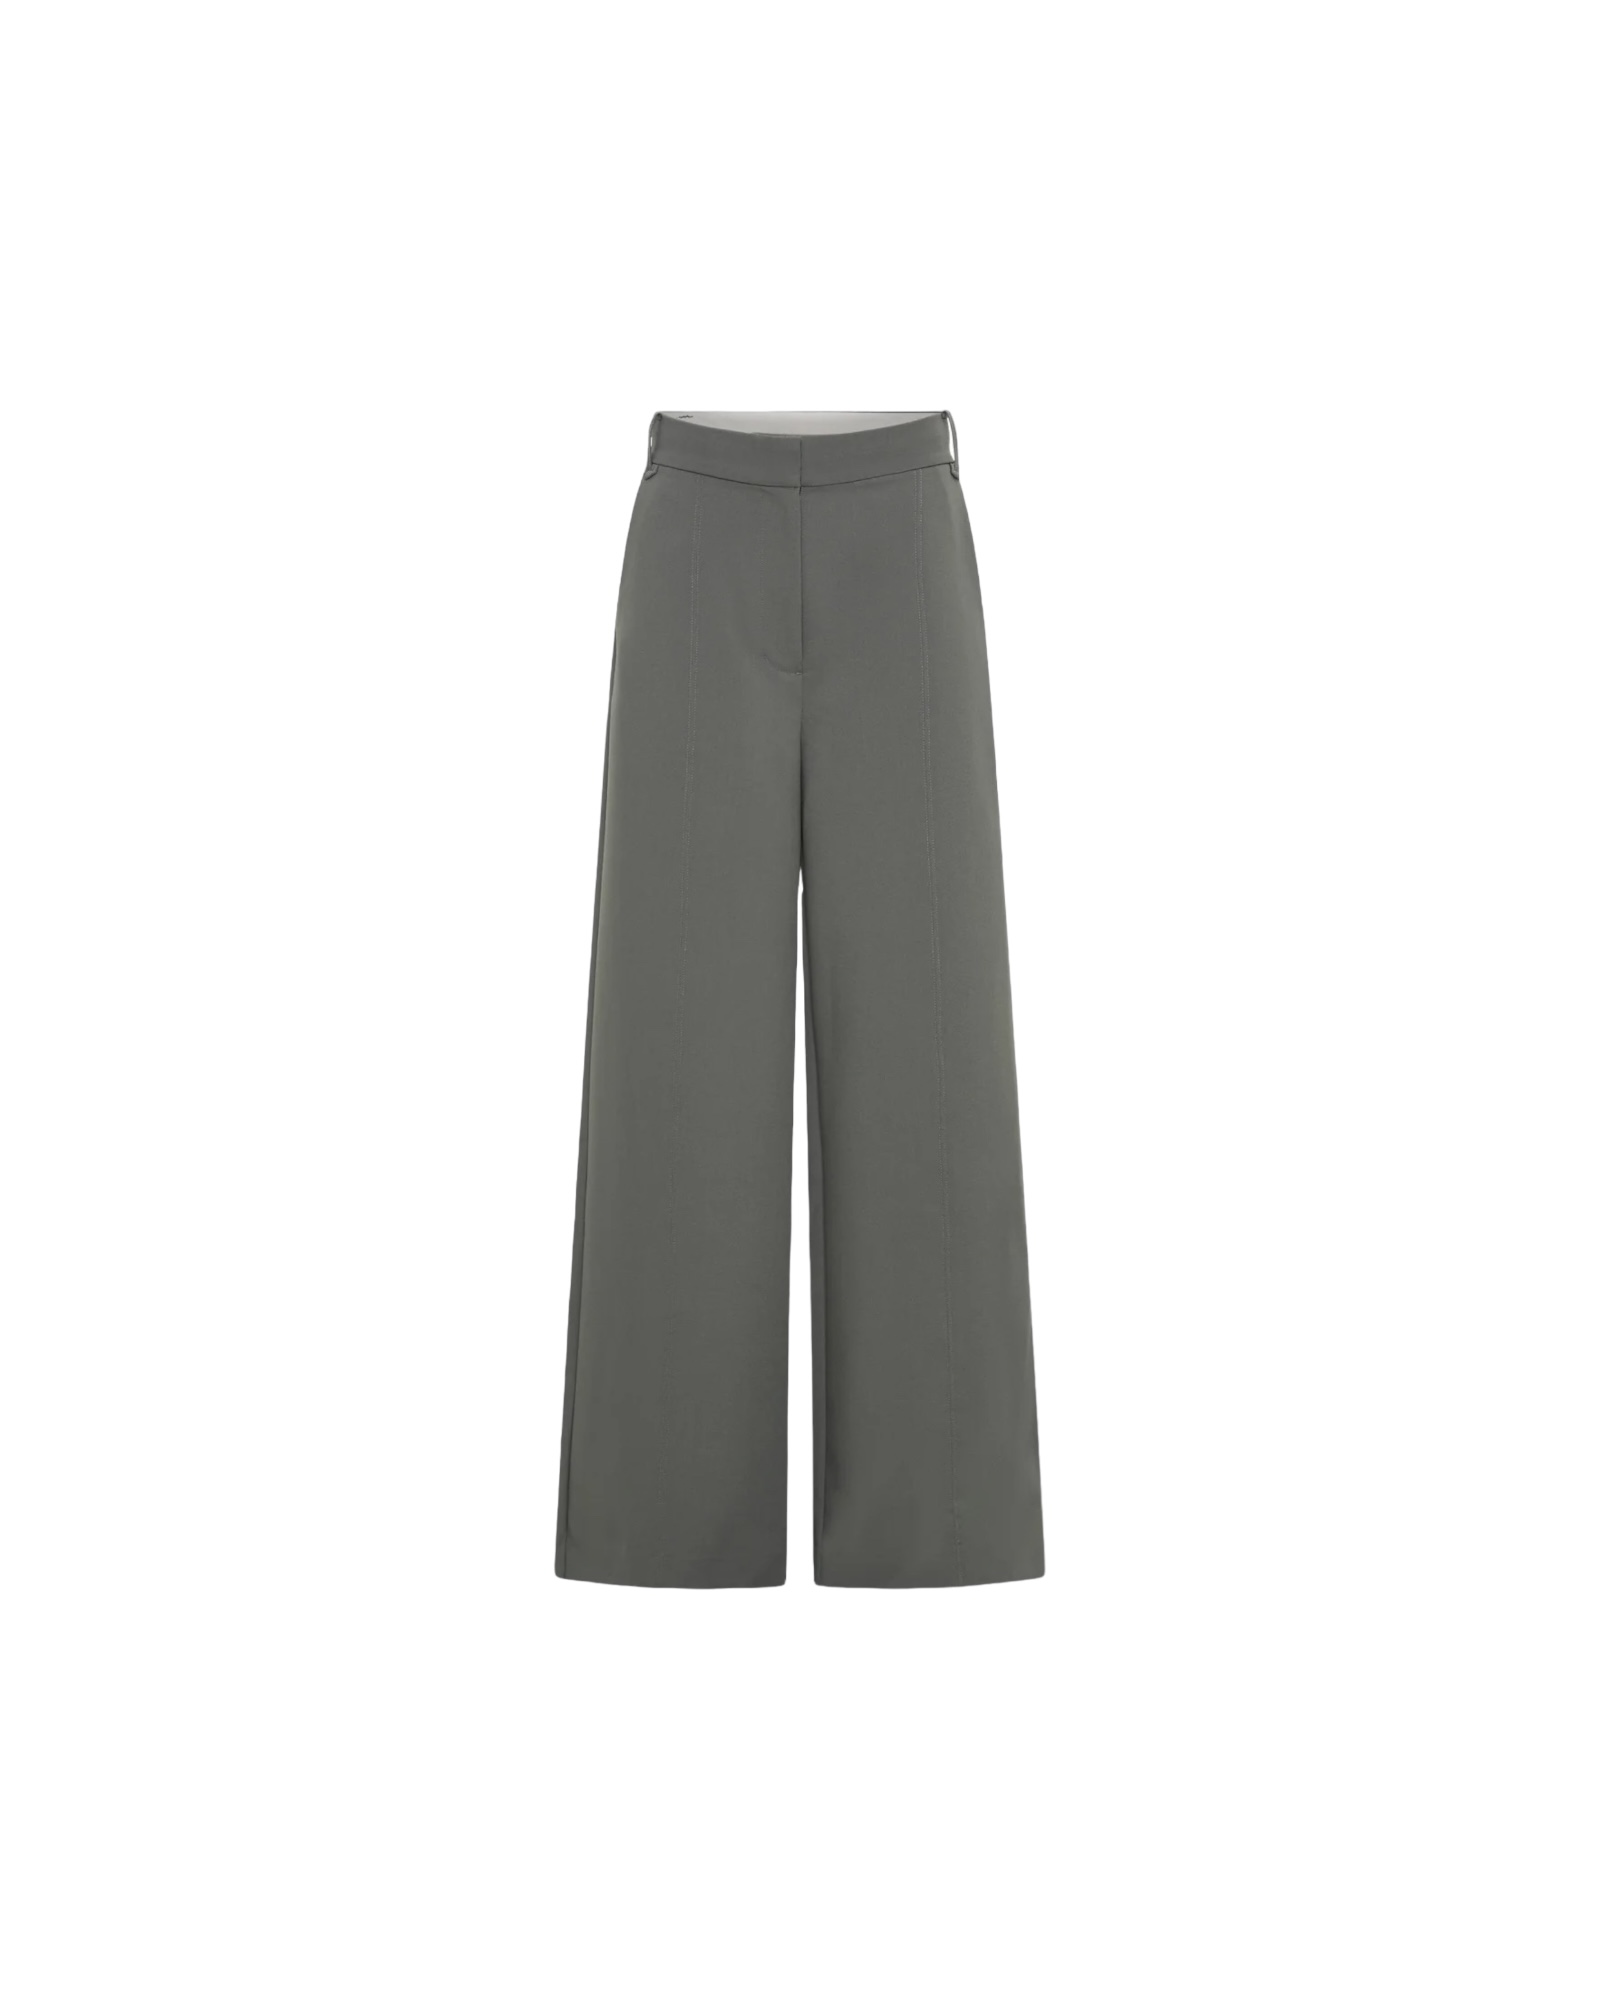 Hose Patterson in steel grey, CAMILLA AND MARC,